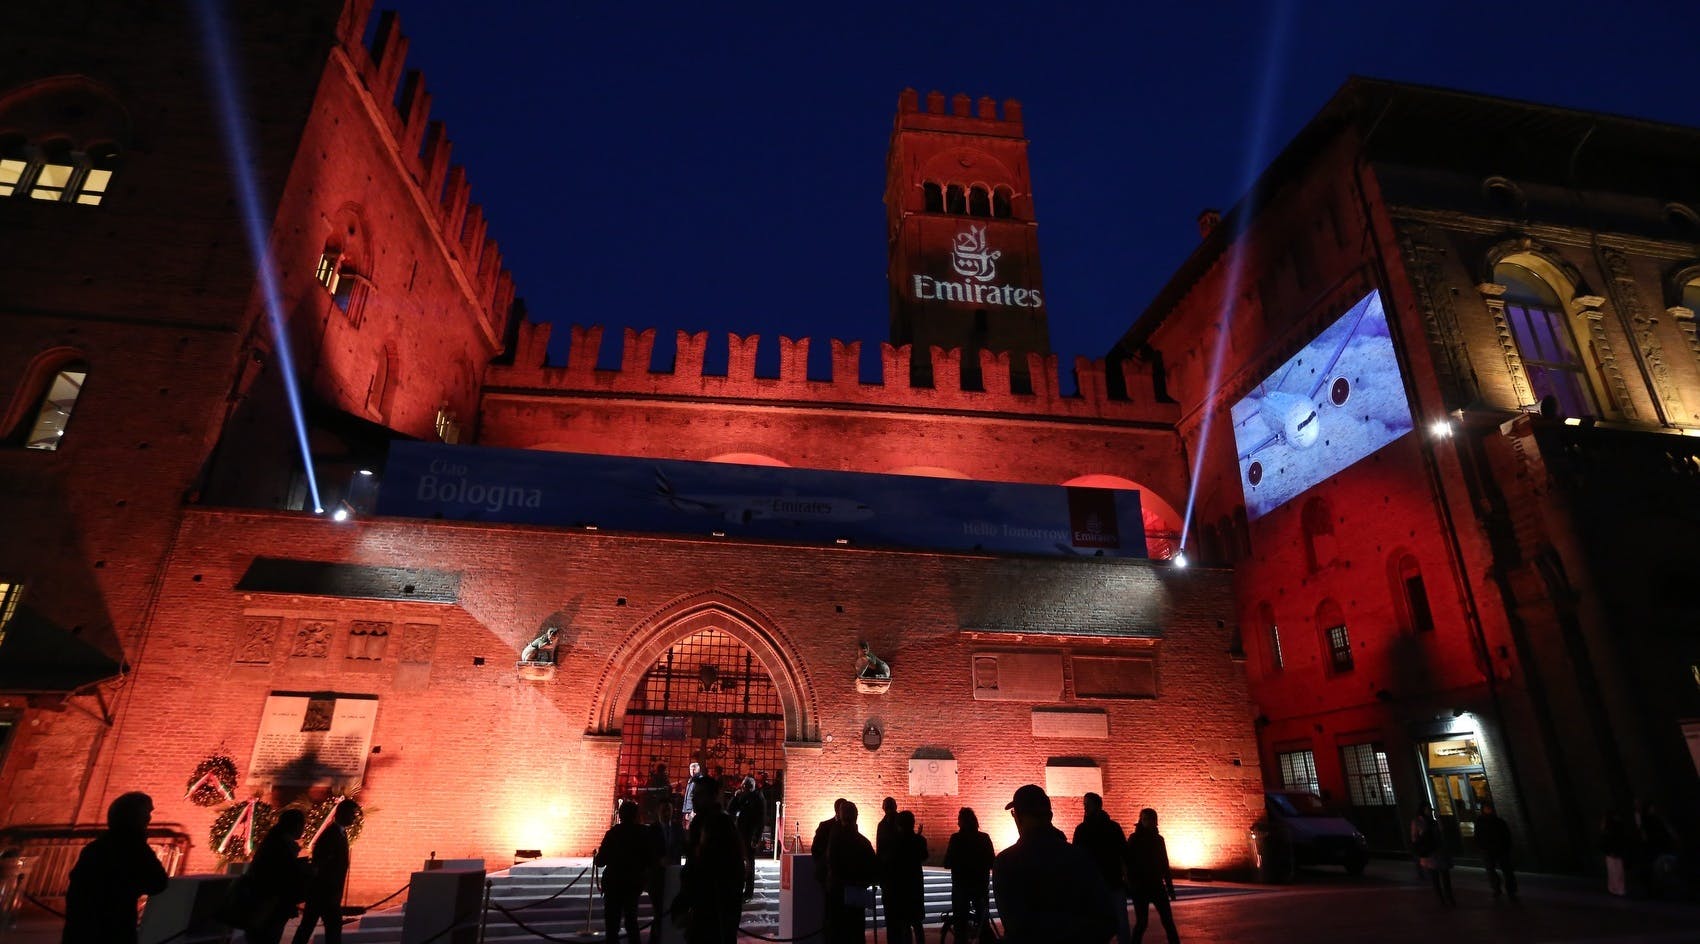 palazzo re enzo in bologna evening event with emirates projection lights